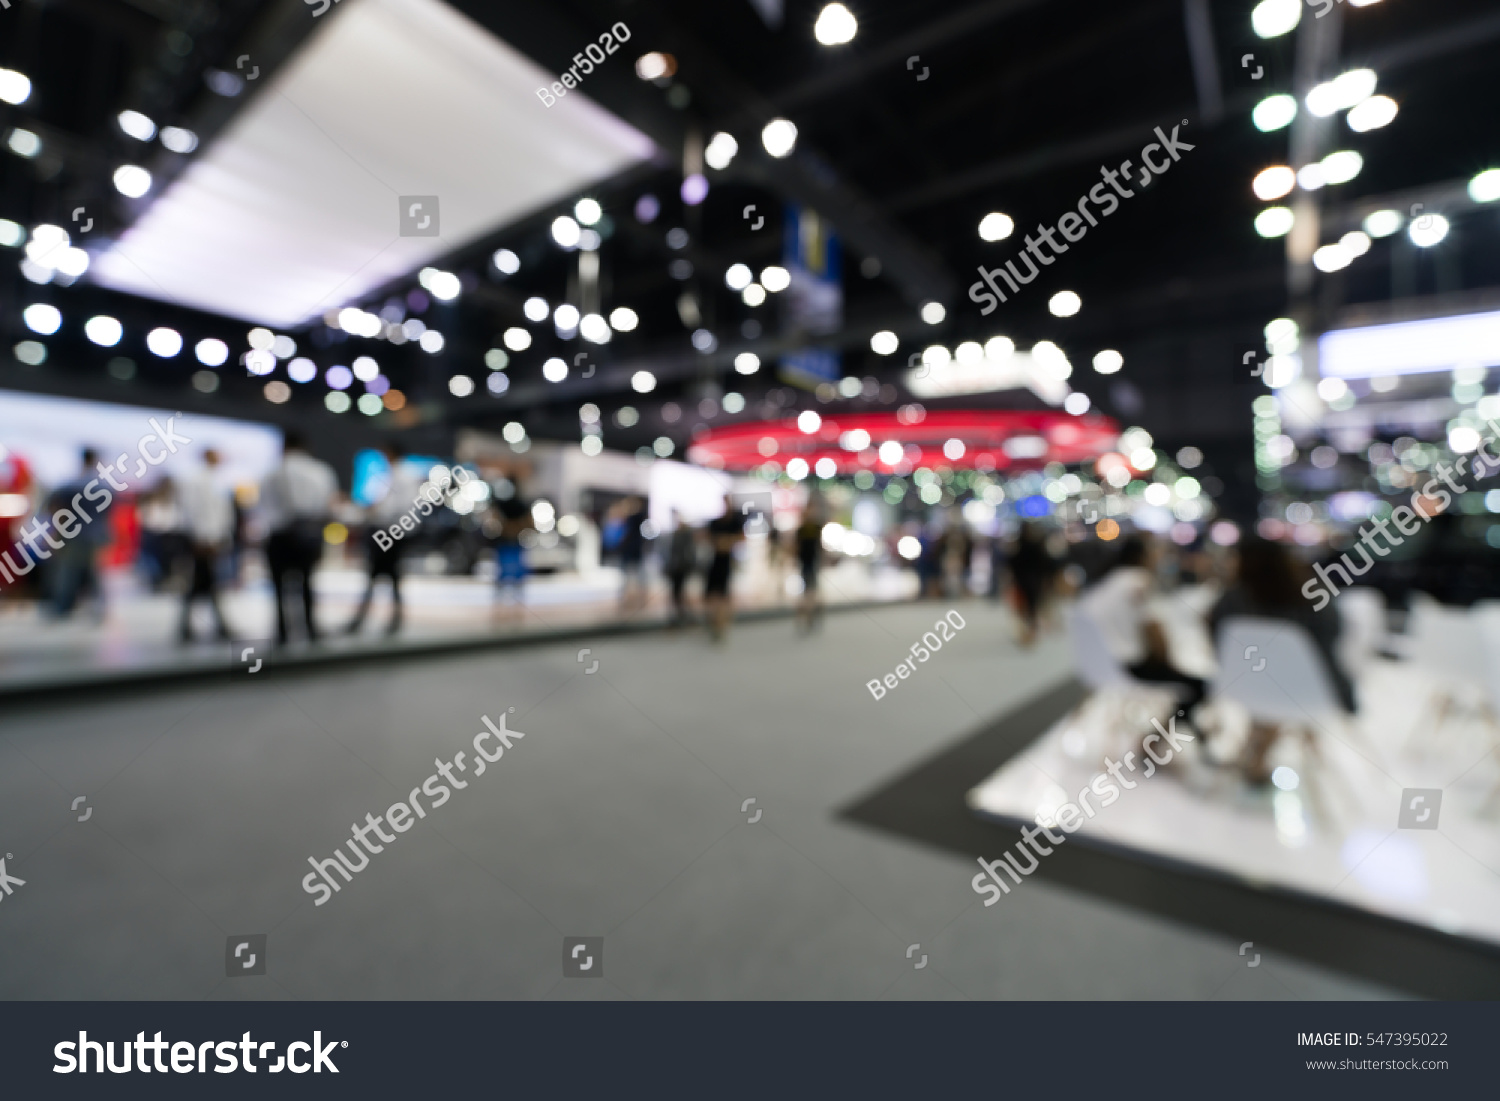 Blur, defocused background of public exhibition hall. Business tradeshow, job fair, or stock market. Organization or company event, commercial trading, or shopping mall marketing advertisement concept #547395022